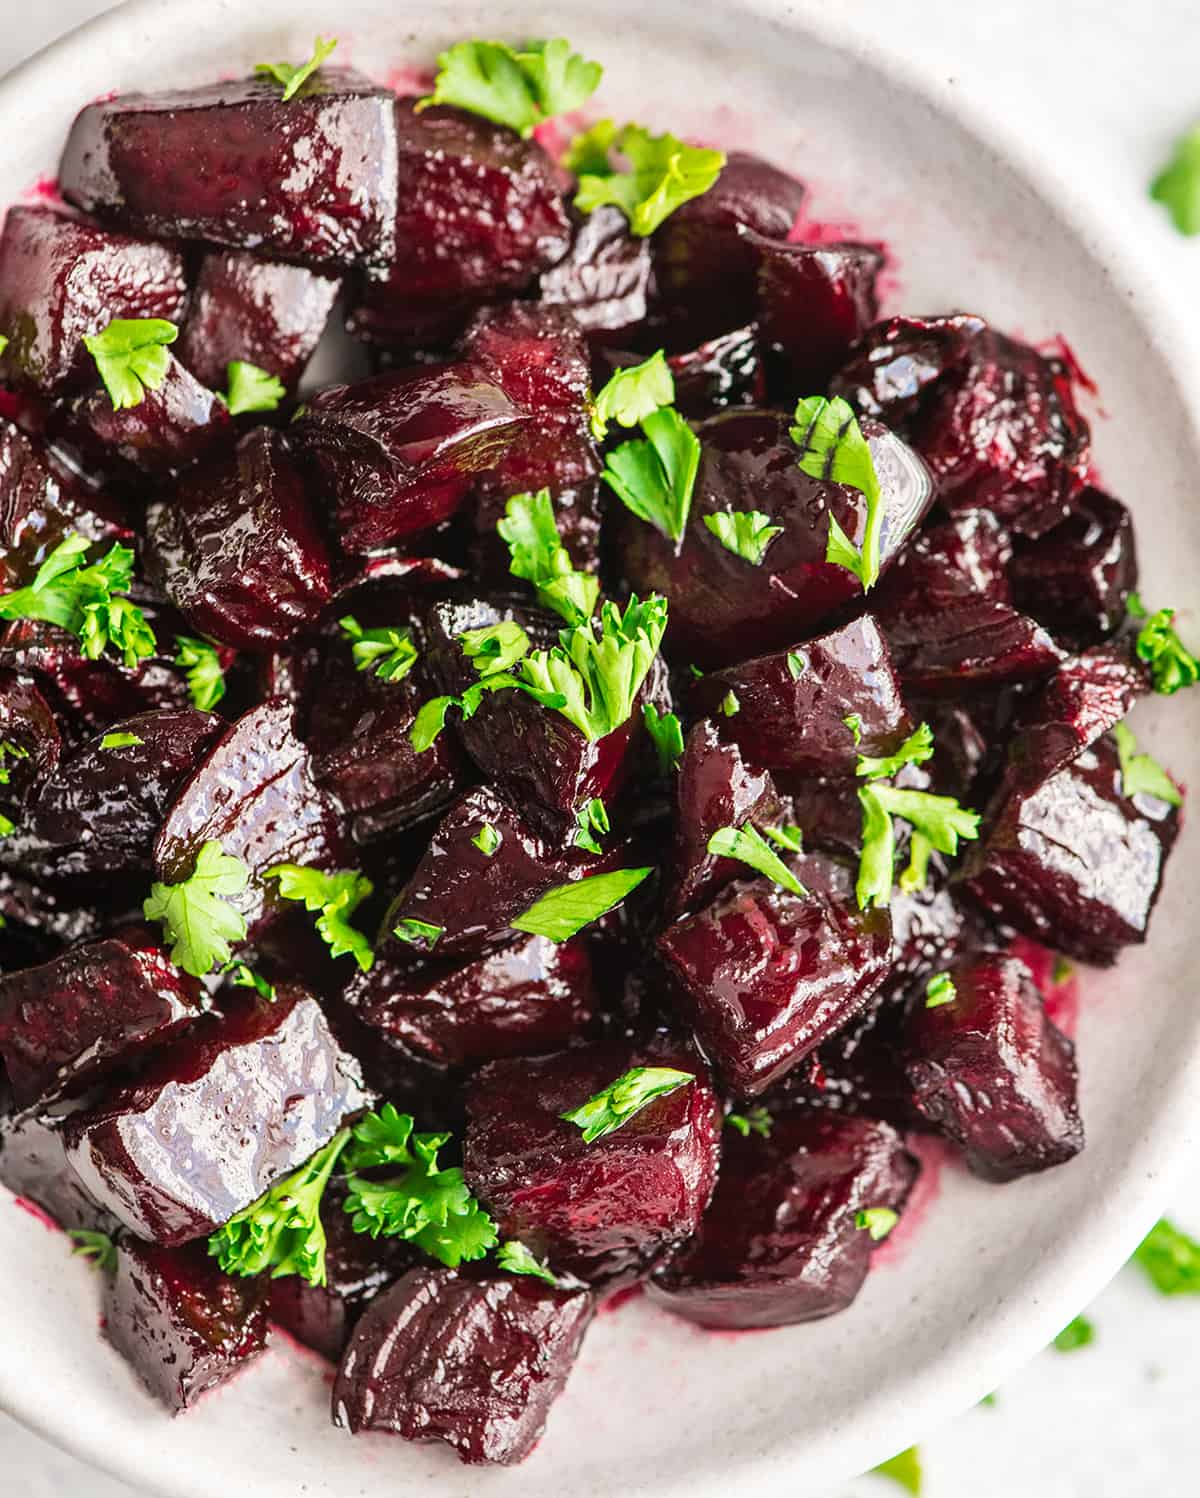 Roasted Beets in a bowl garnished with greens